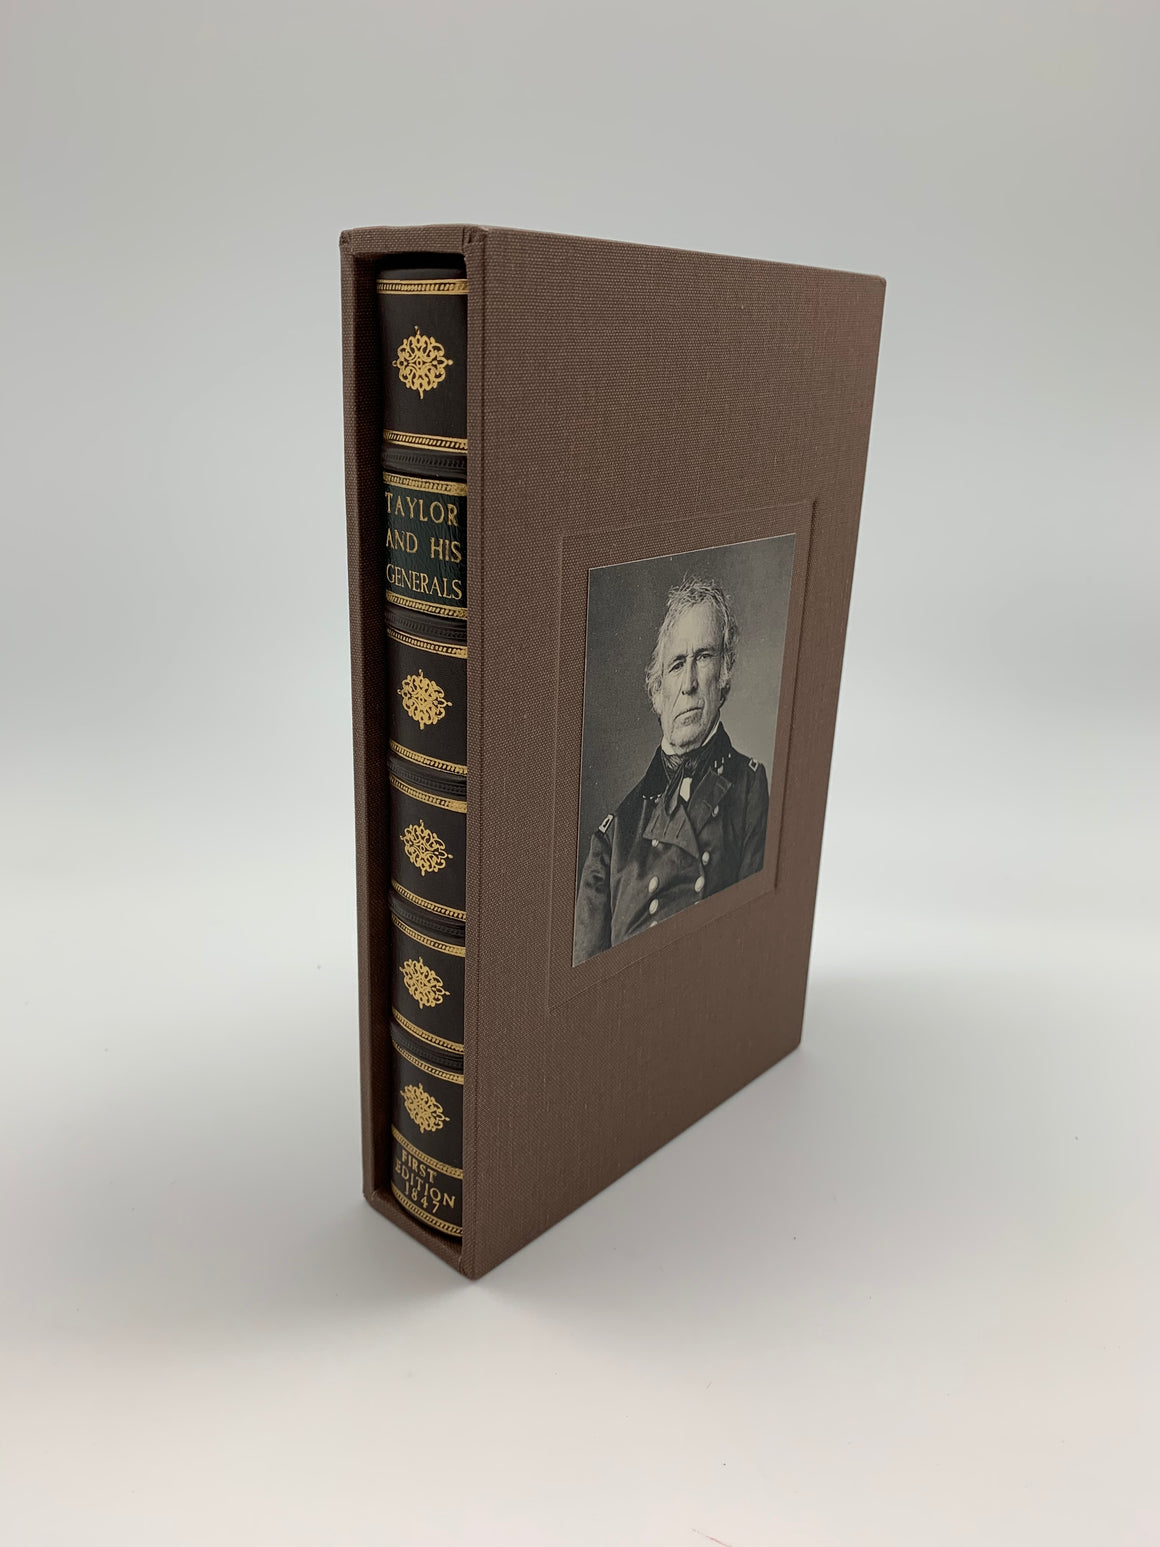 Taylor and His Generals, Published by E. H. Butler & Co., First Edition, 1847